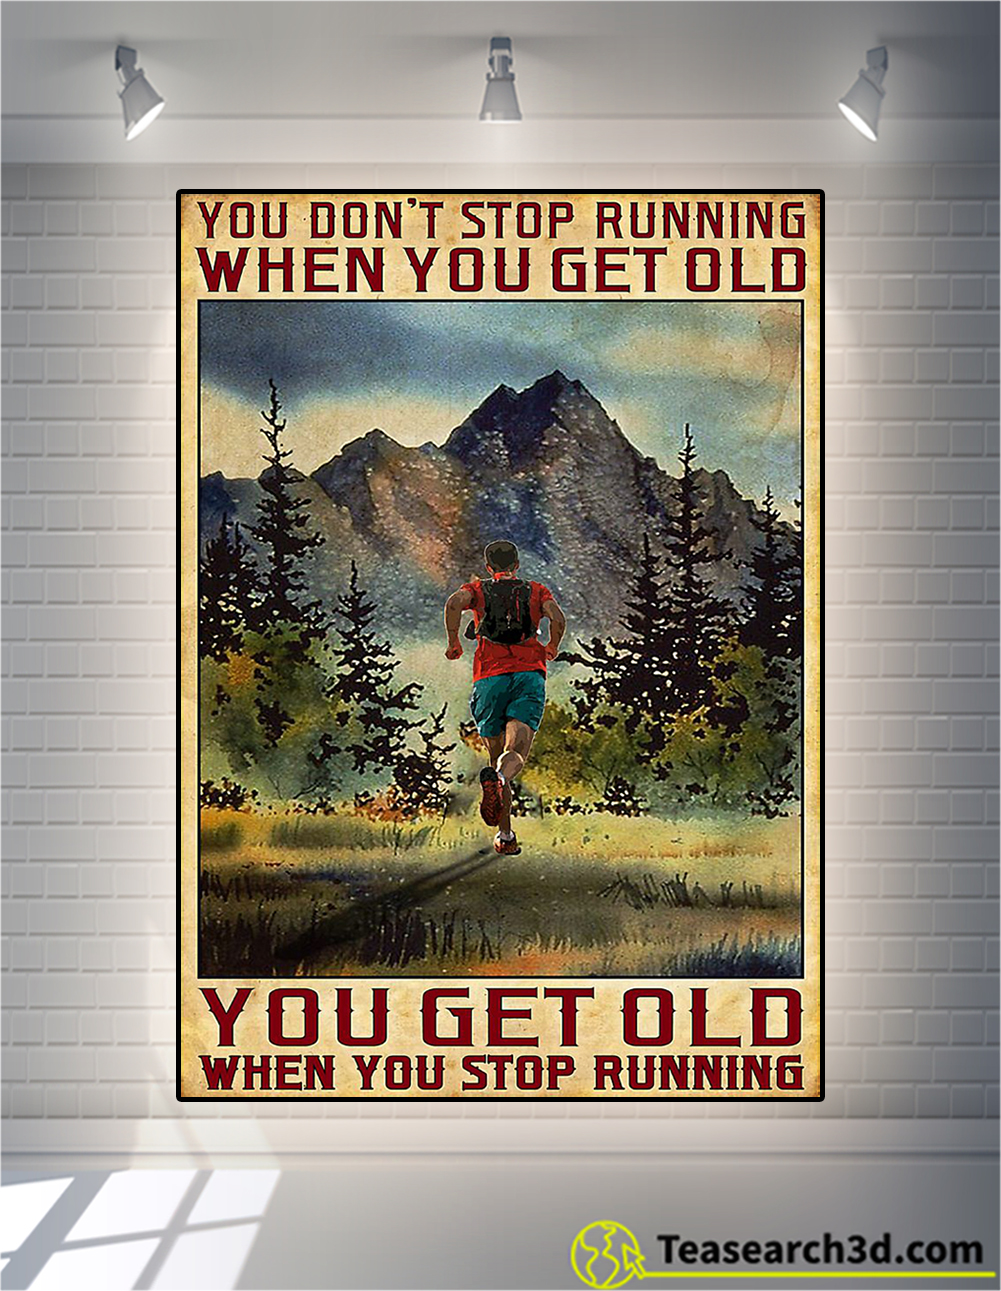 You don't stop running when you get old poster